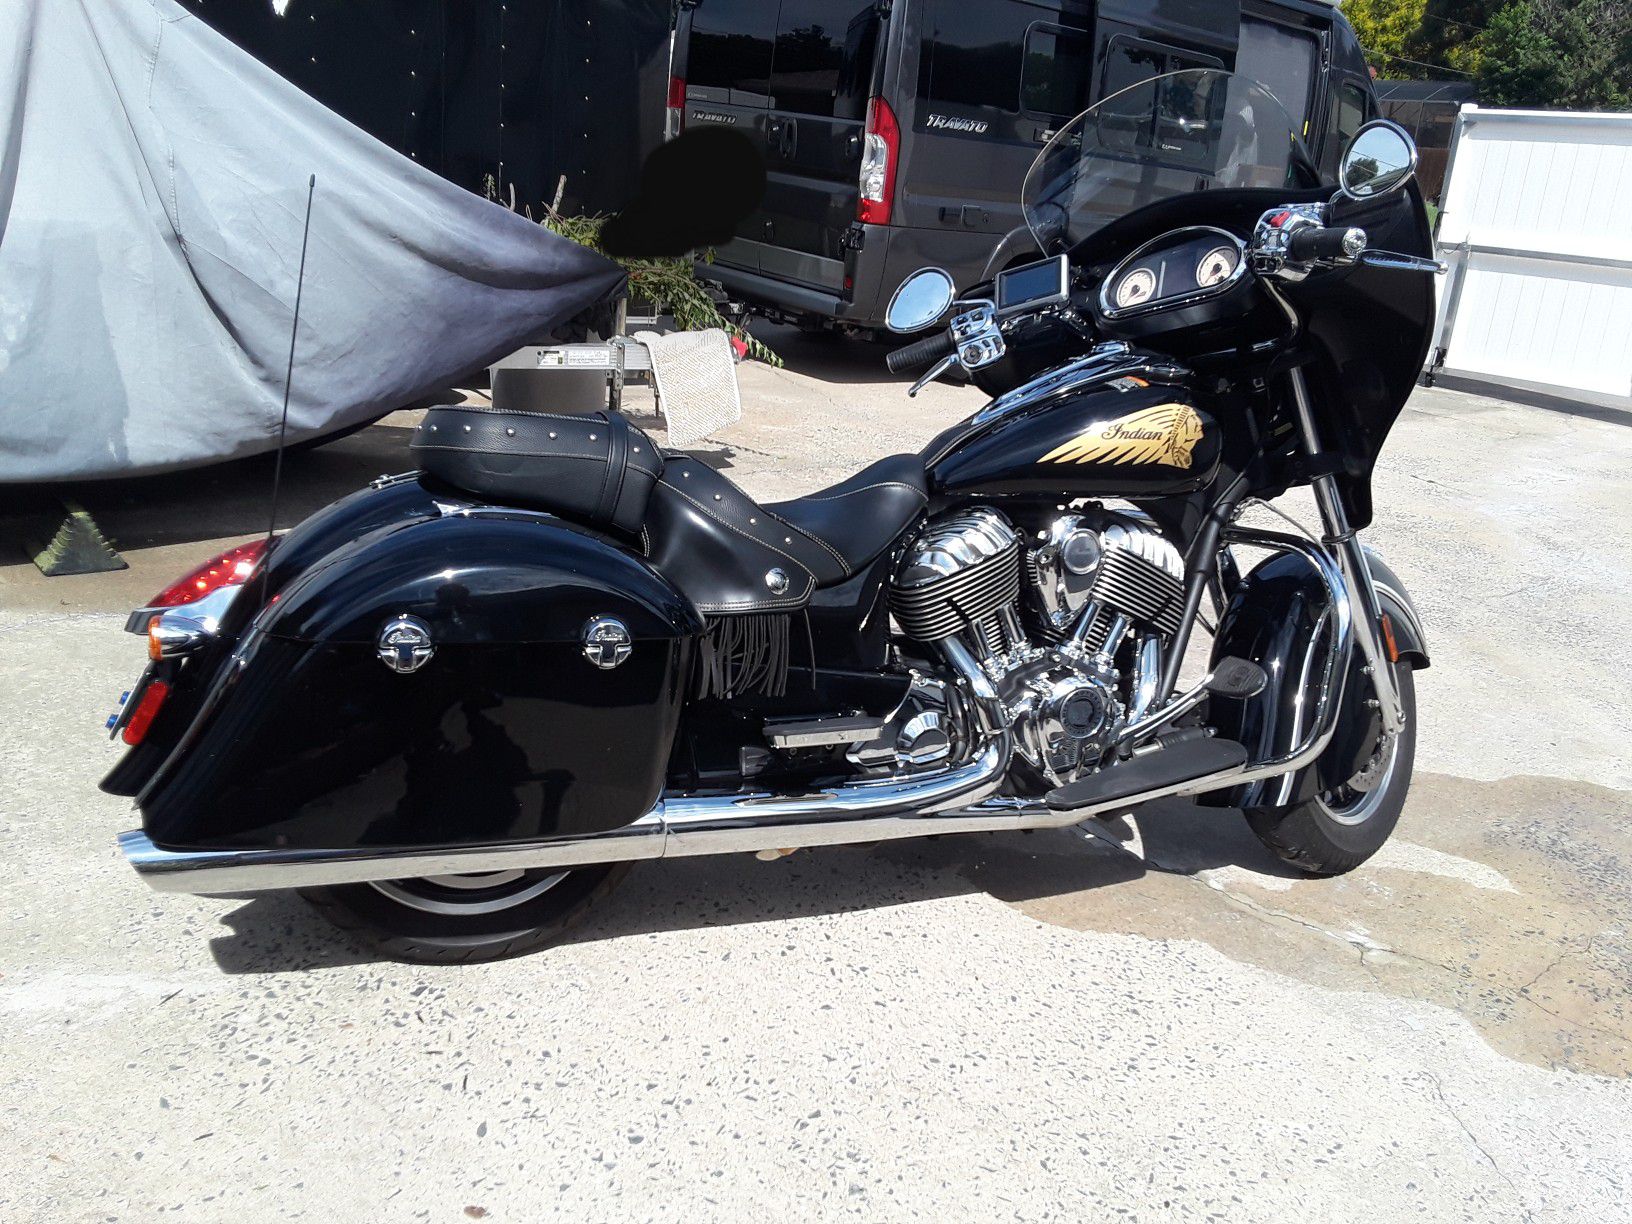 2015 Indian Chieftain, low miles